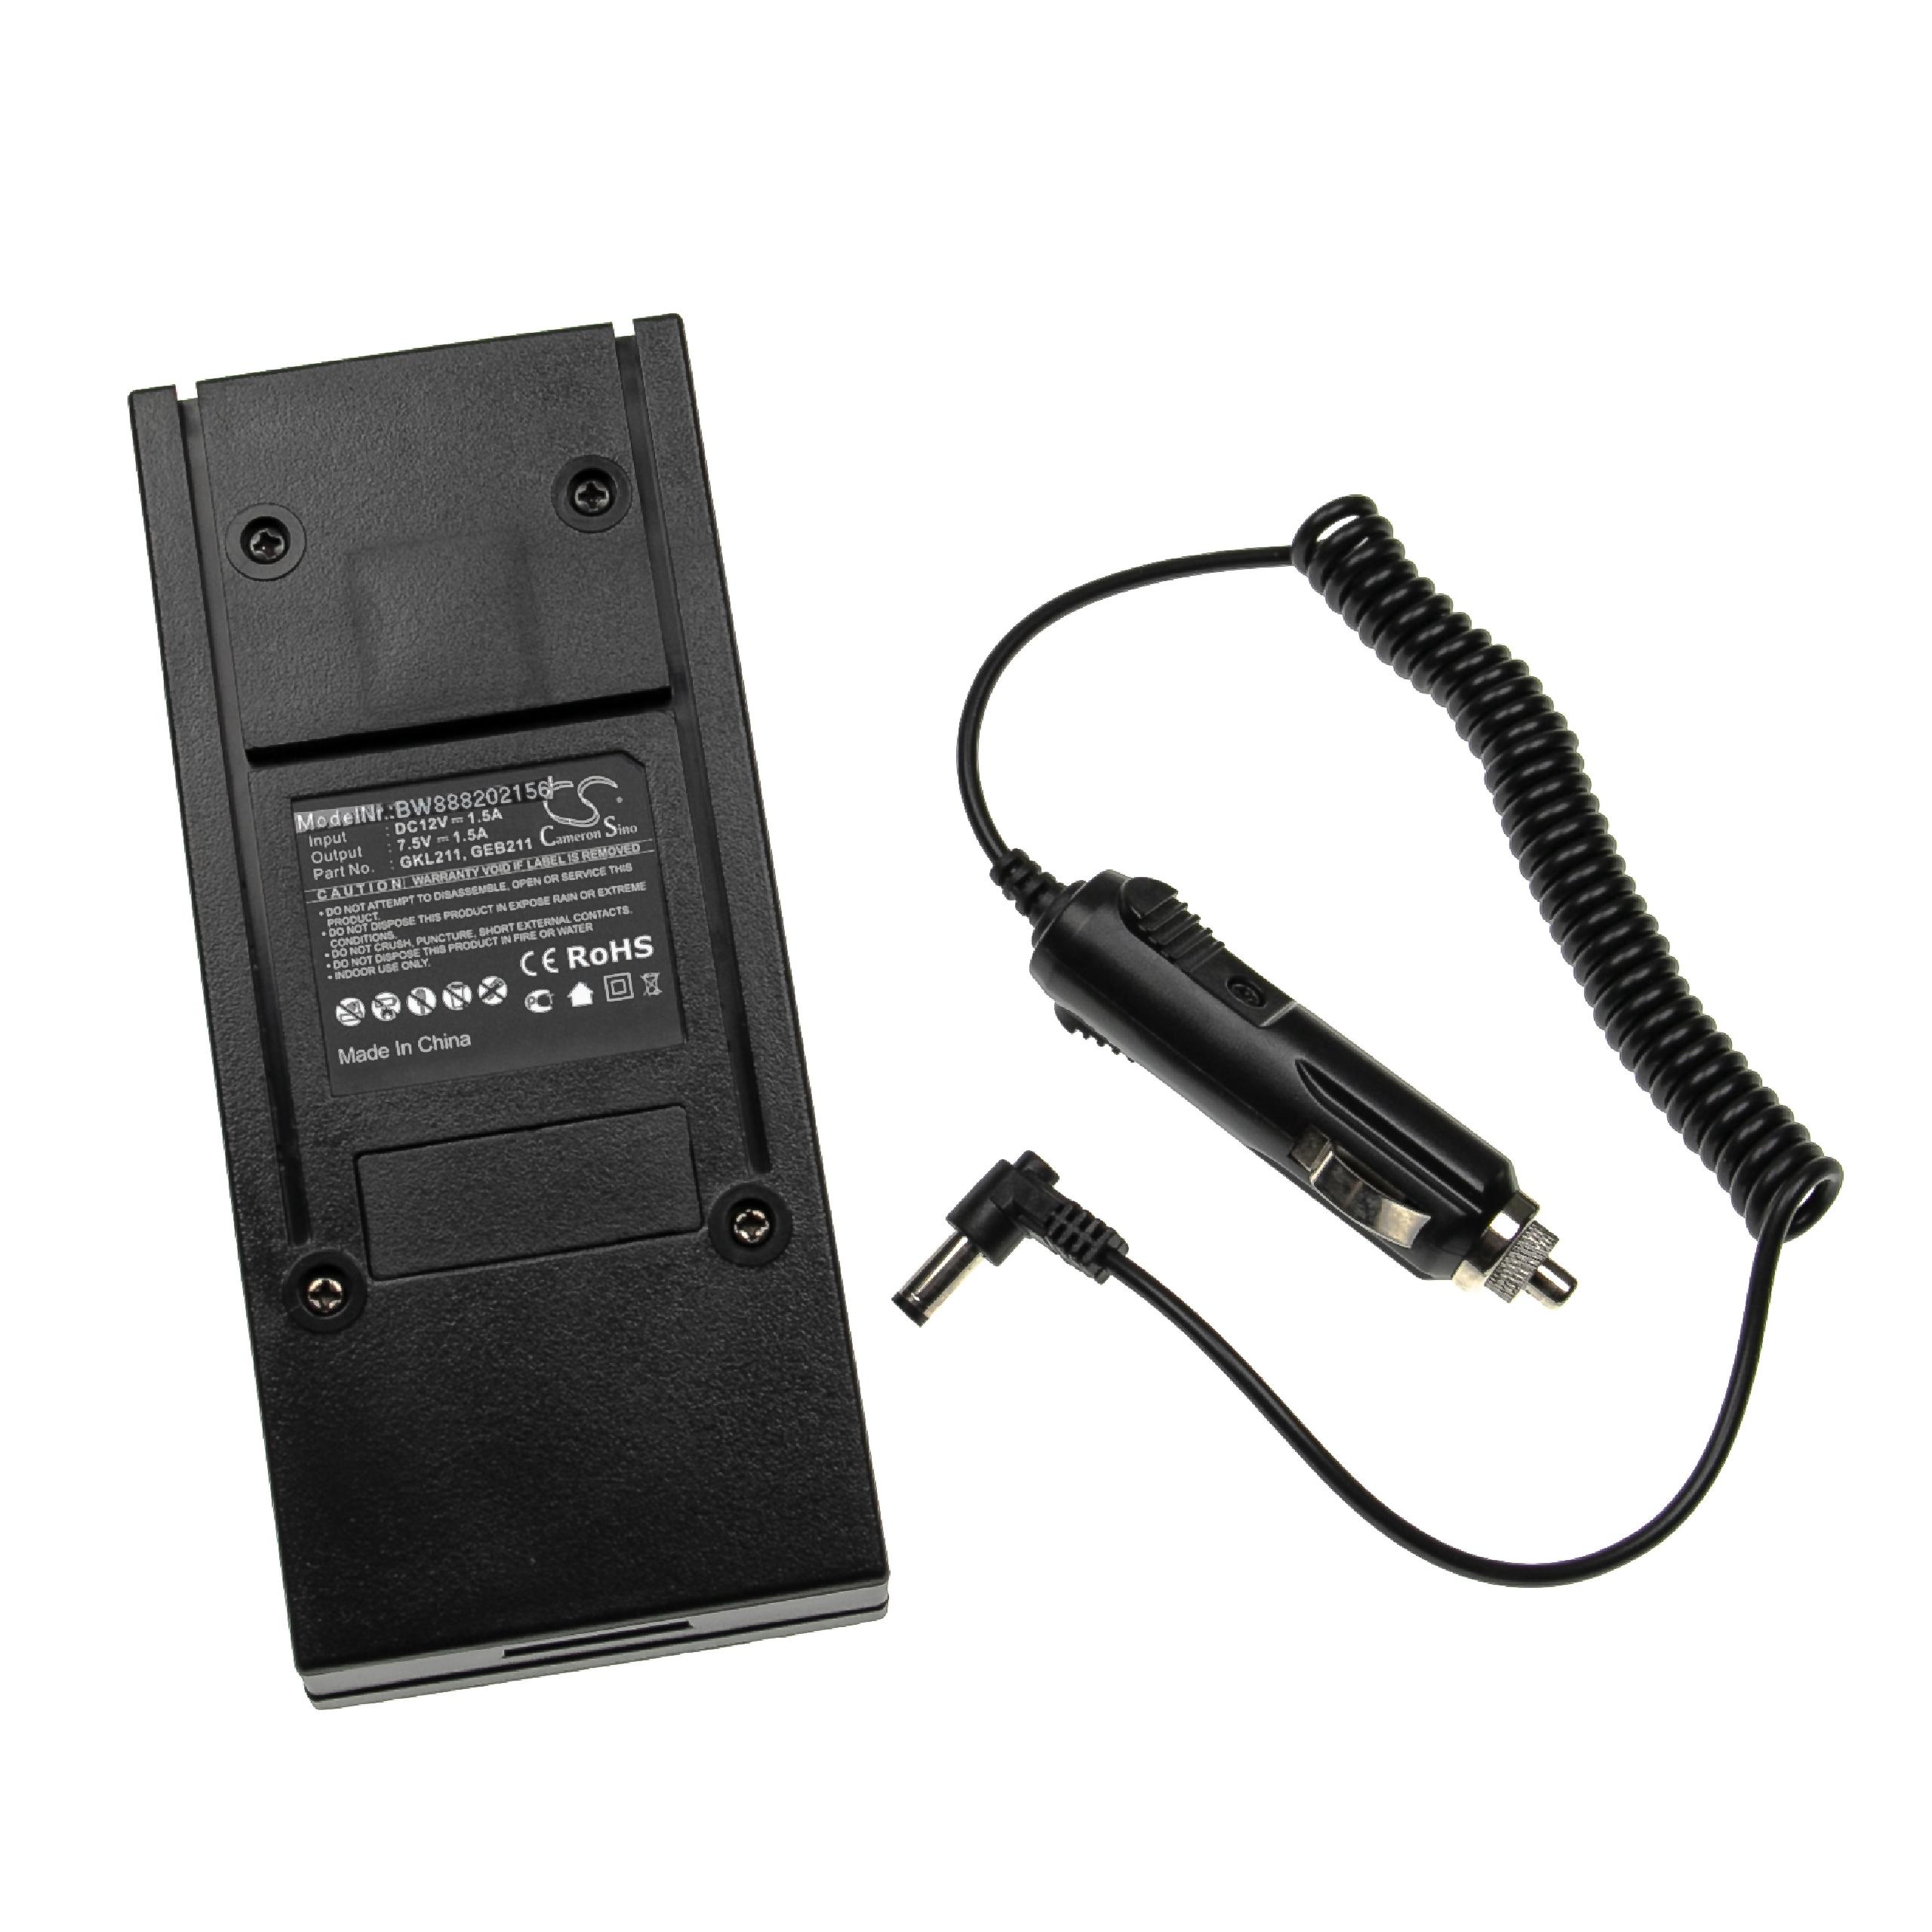 Charger Suitable for Measuring Tool / Battery etc. - Charge Dock + In-Car Cable, 7.5 V /